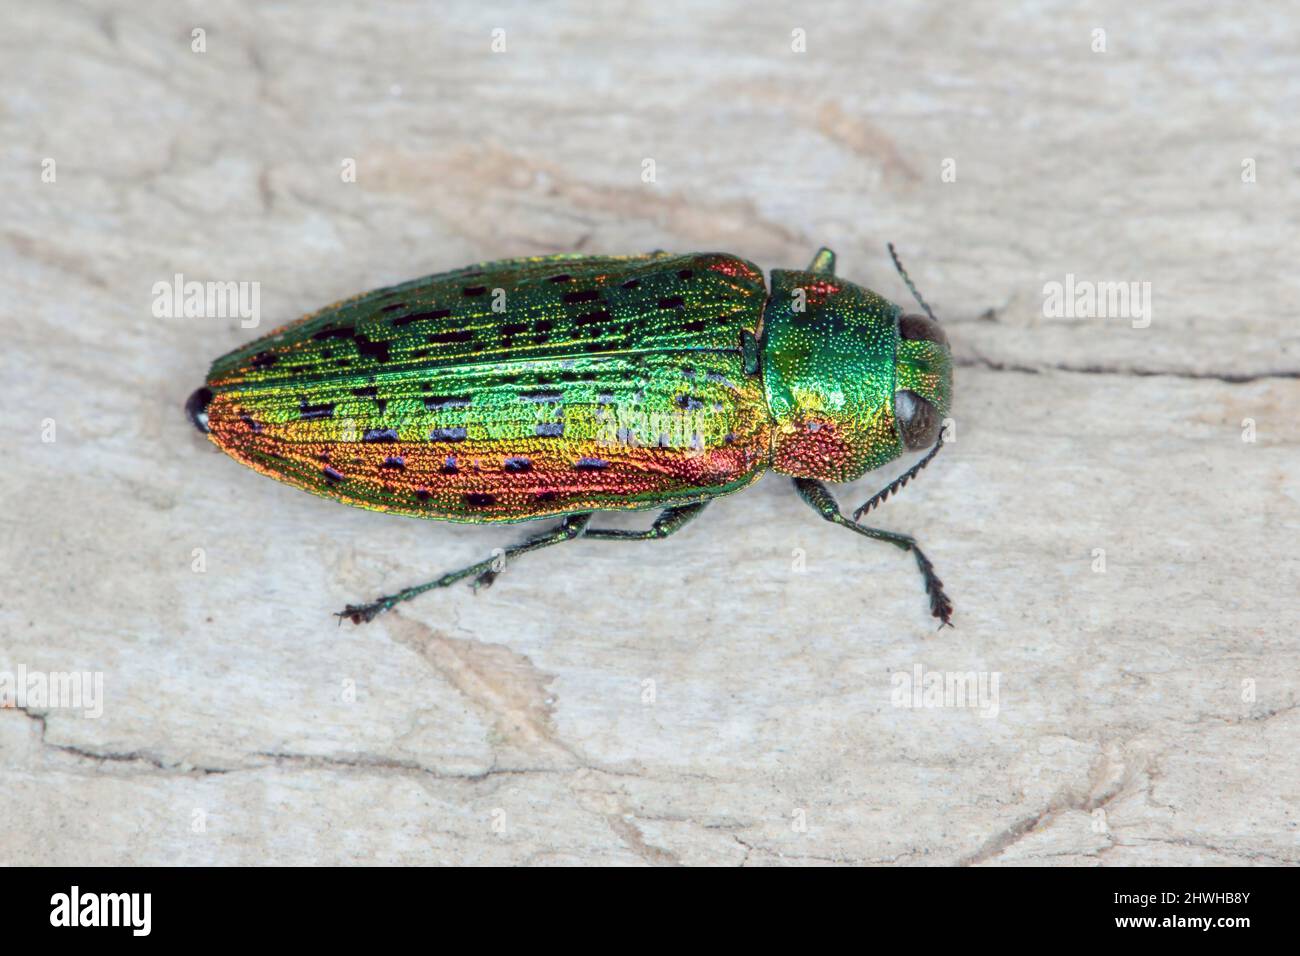 Elm tree jewel beetle Lamprodila decipiens. A colorful insect species occurring in Europe in its natural environment. Stock Photo